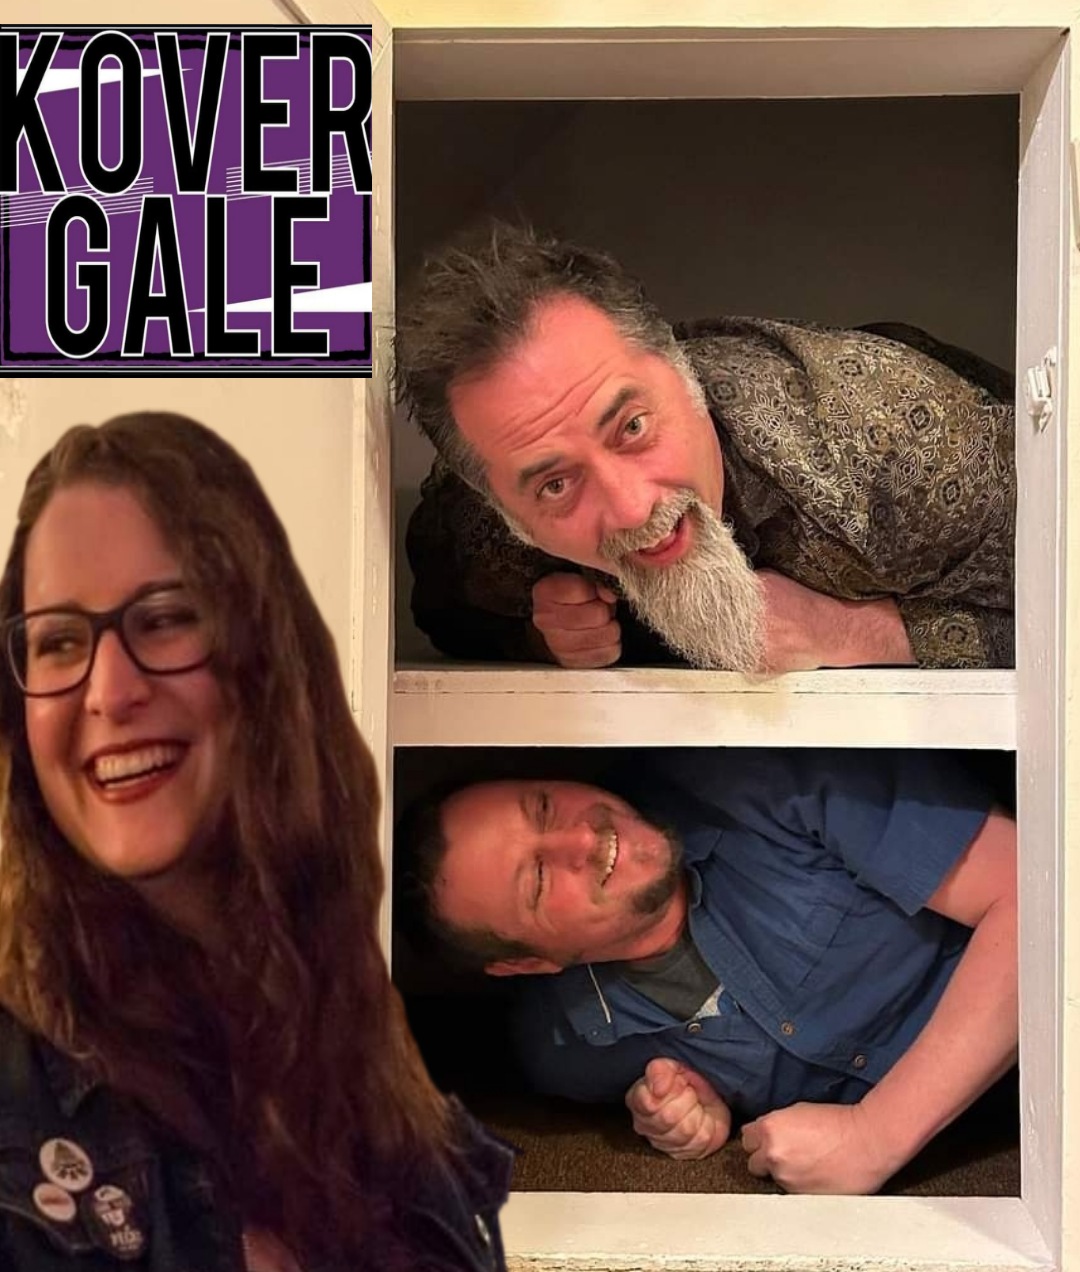 Kover Gale